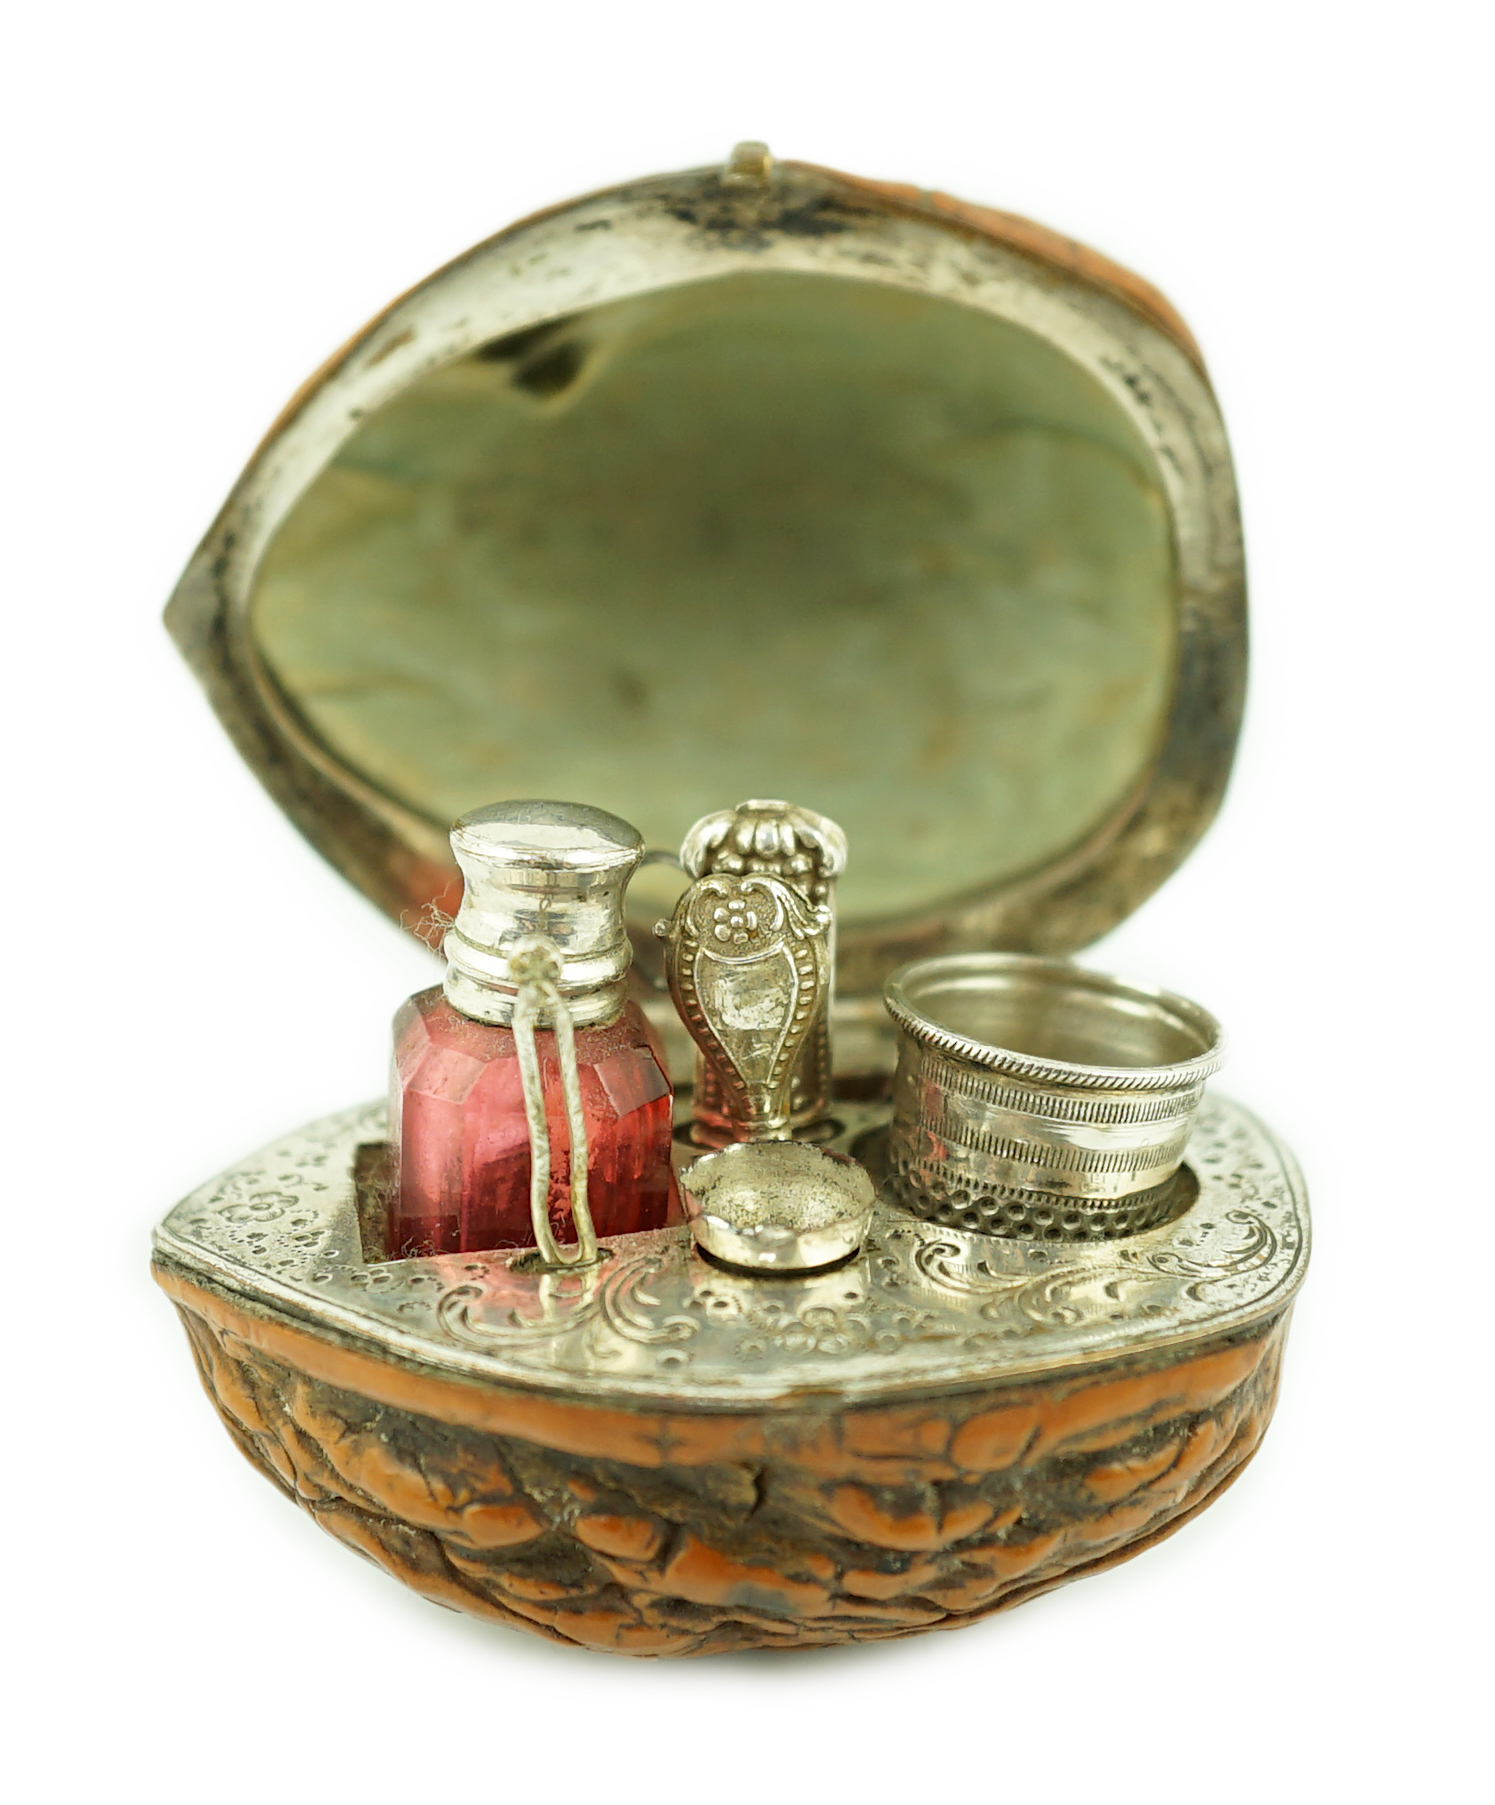 A 19th century French novelty etui case, modelled as a walnut, containing six silver or silver mounted implements